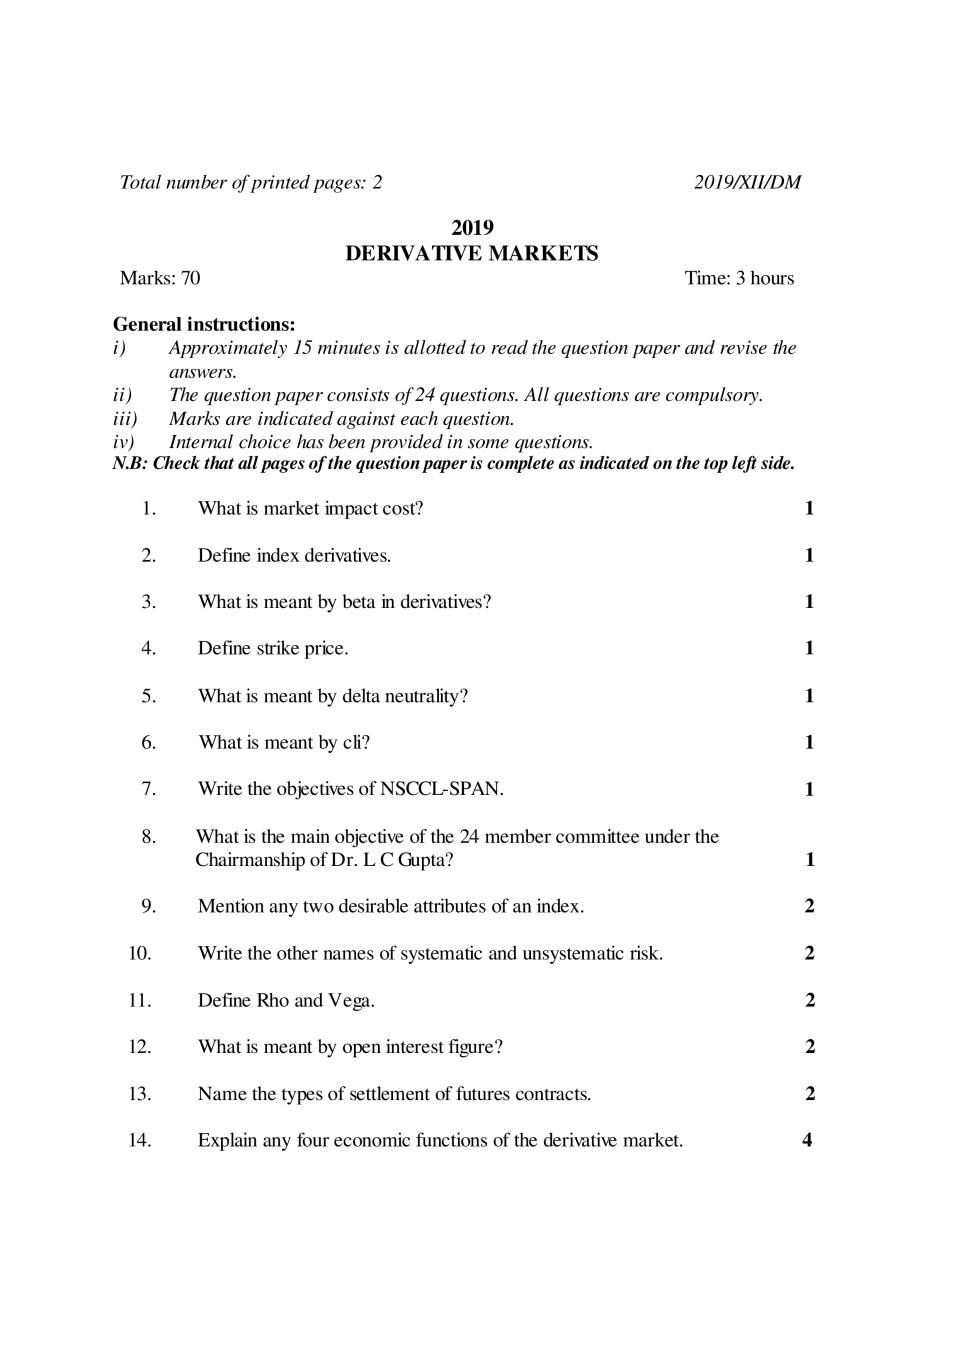 NBSE Class 12 Question Paper 2019 for Derivative Markets - Page 1